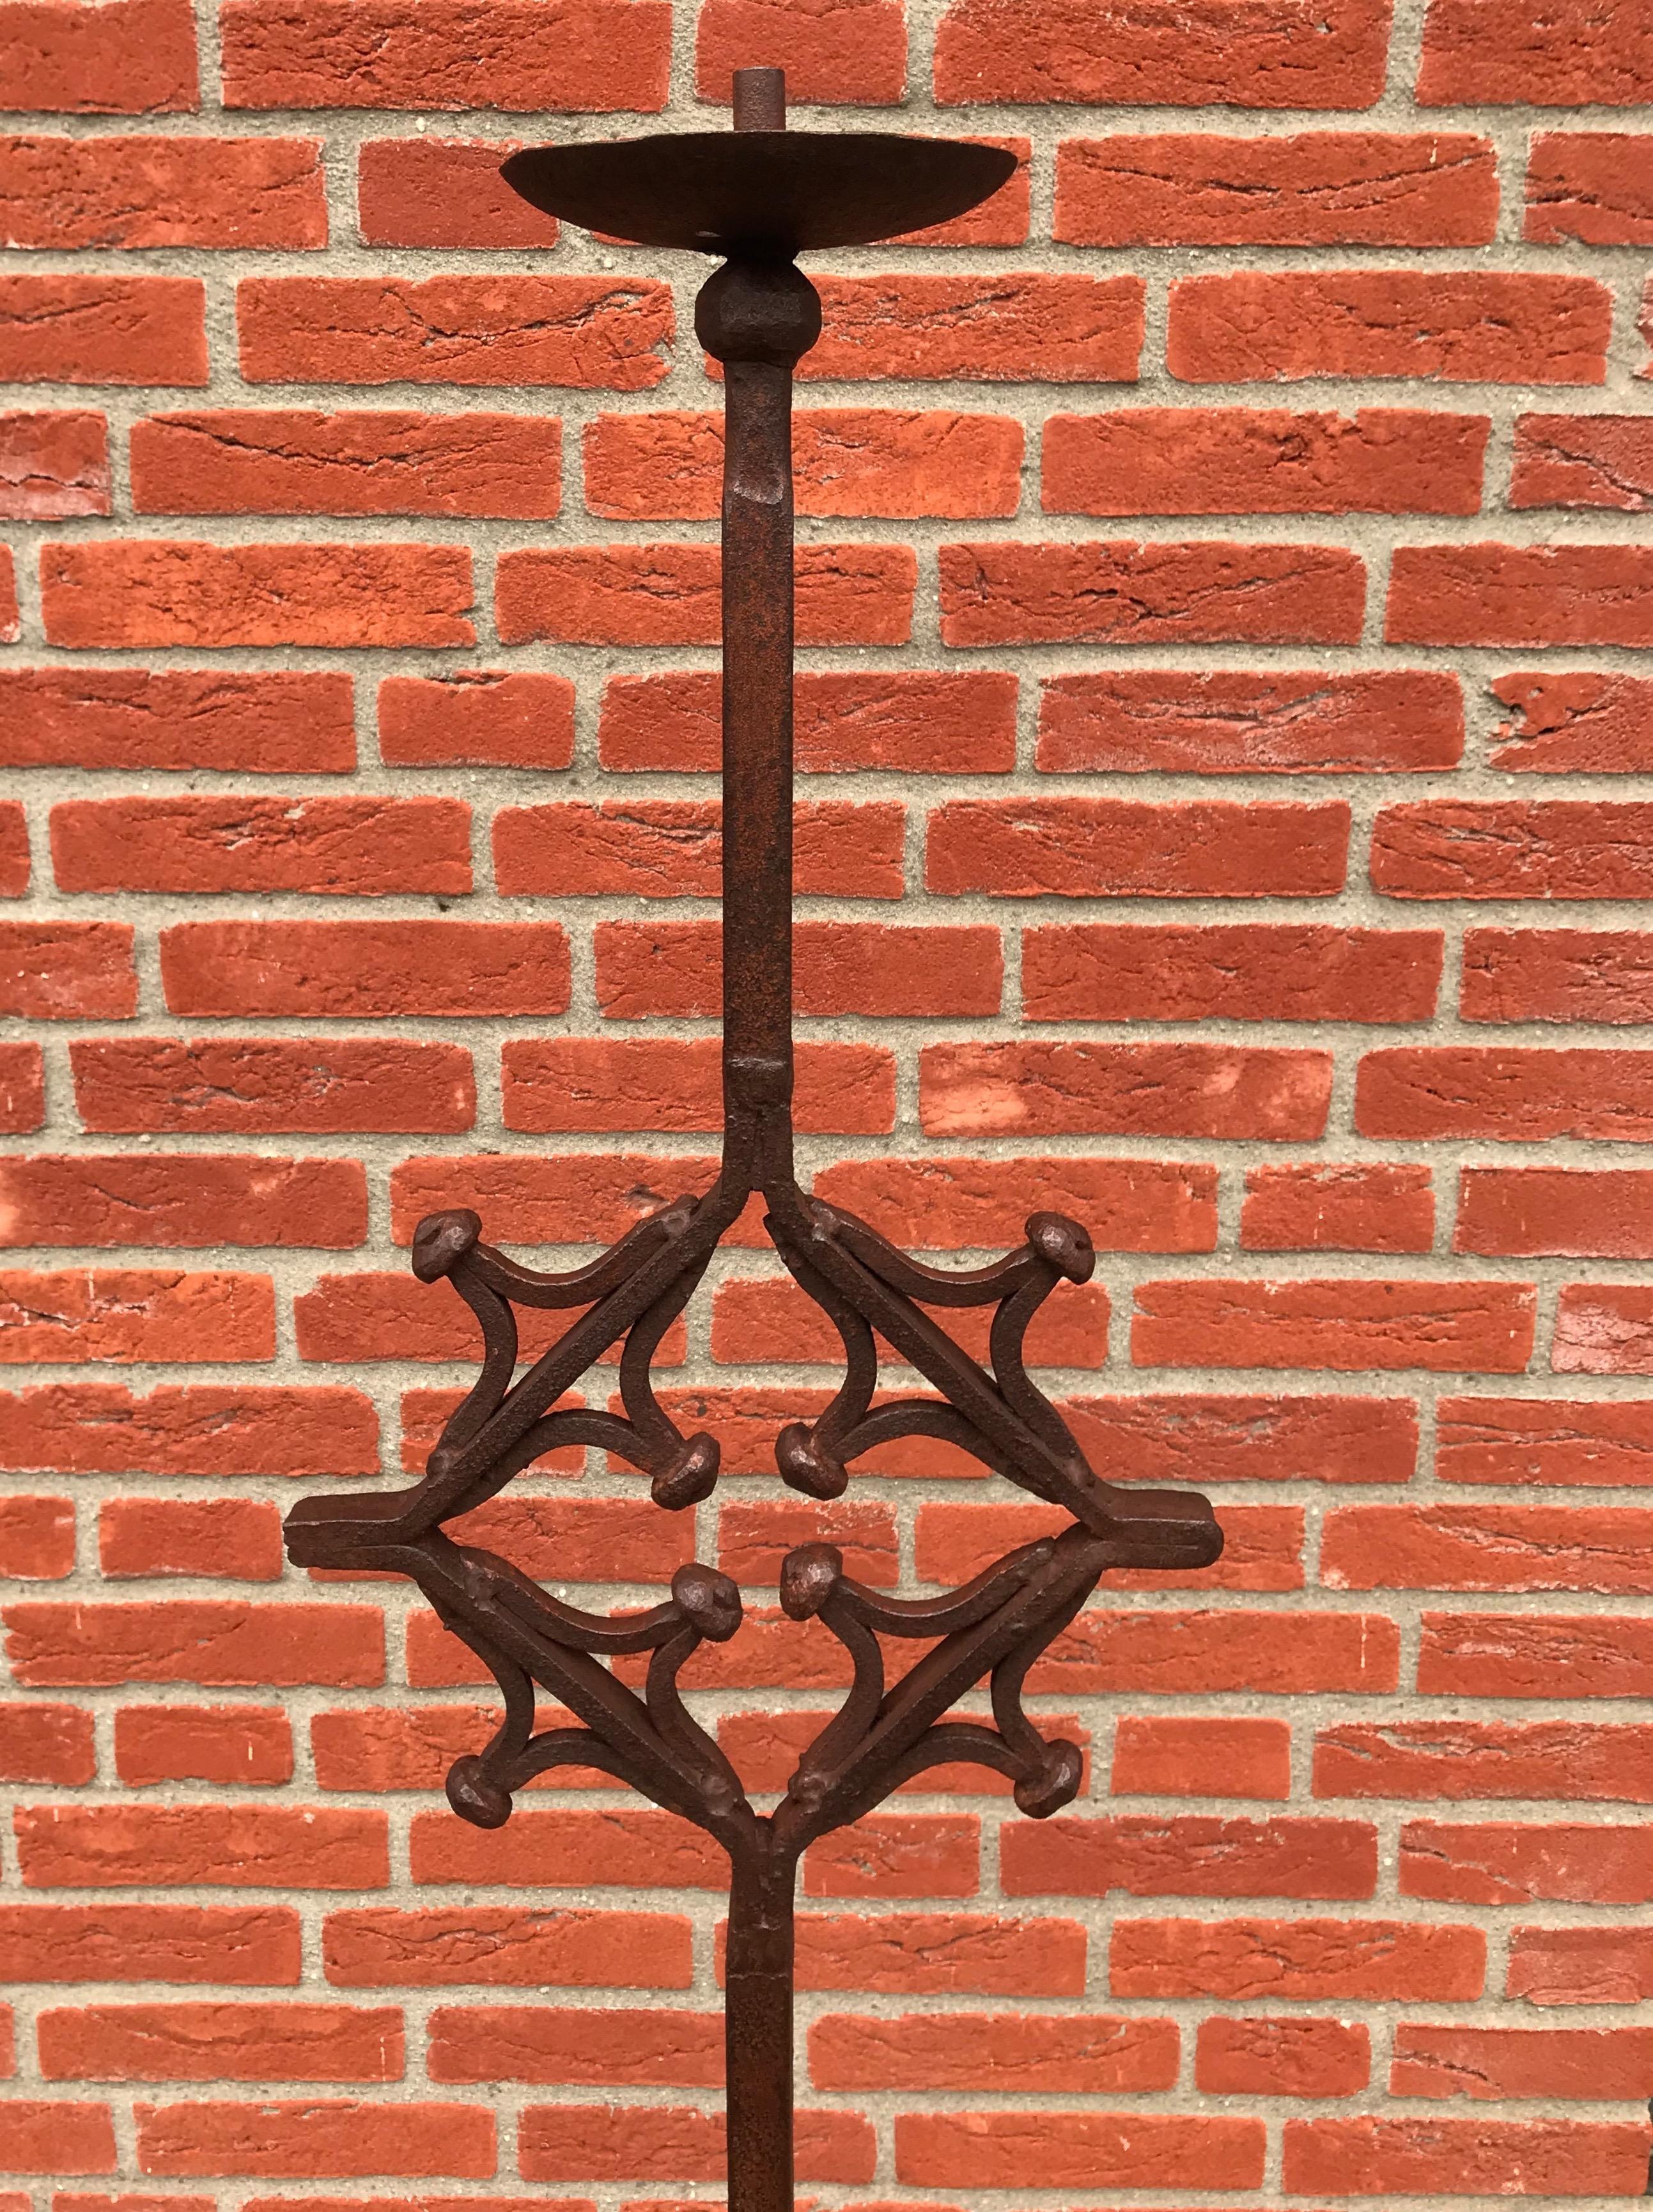 Antique Hand Forged Wrought Iron Gothic Revival Castle Floorlamp or Candlestick For Sale 3